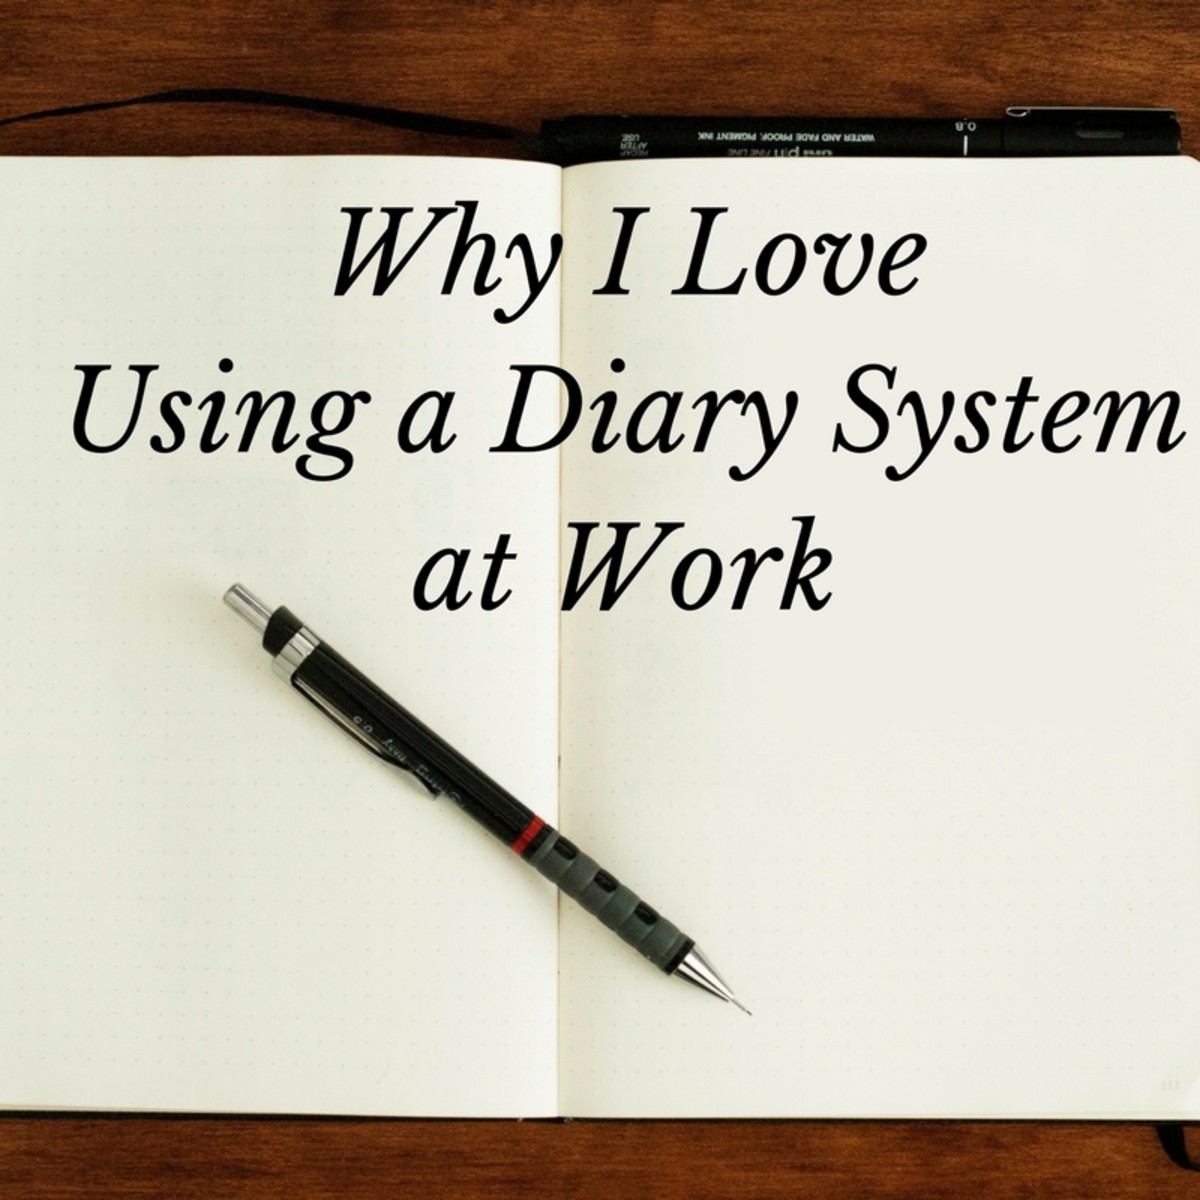 How to Effectively Use a Diary System at Work